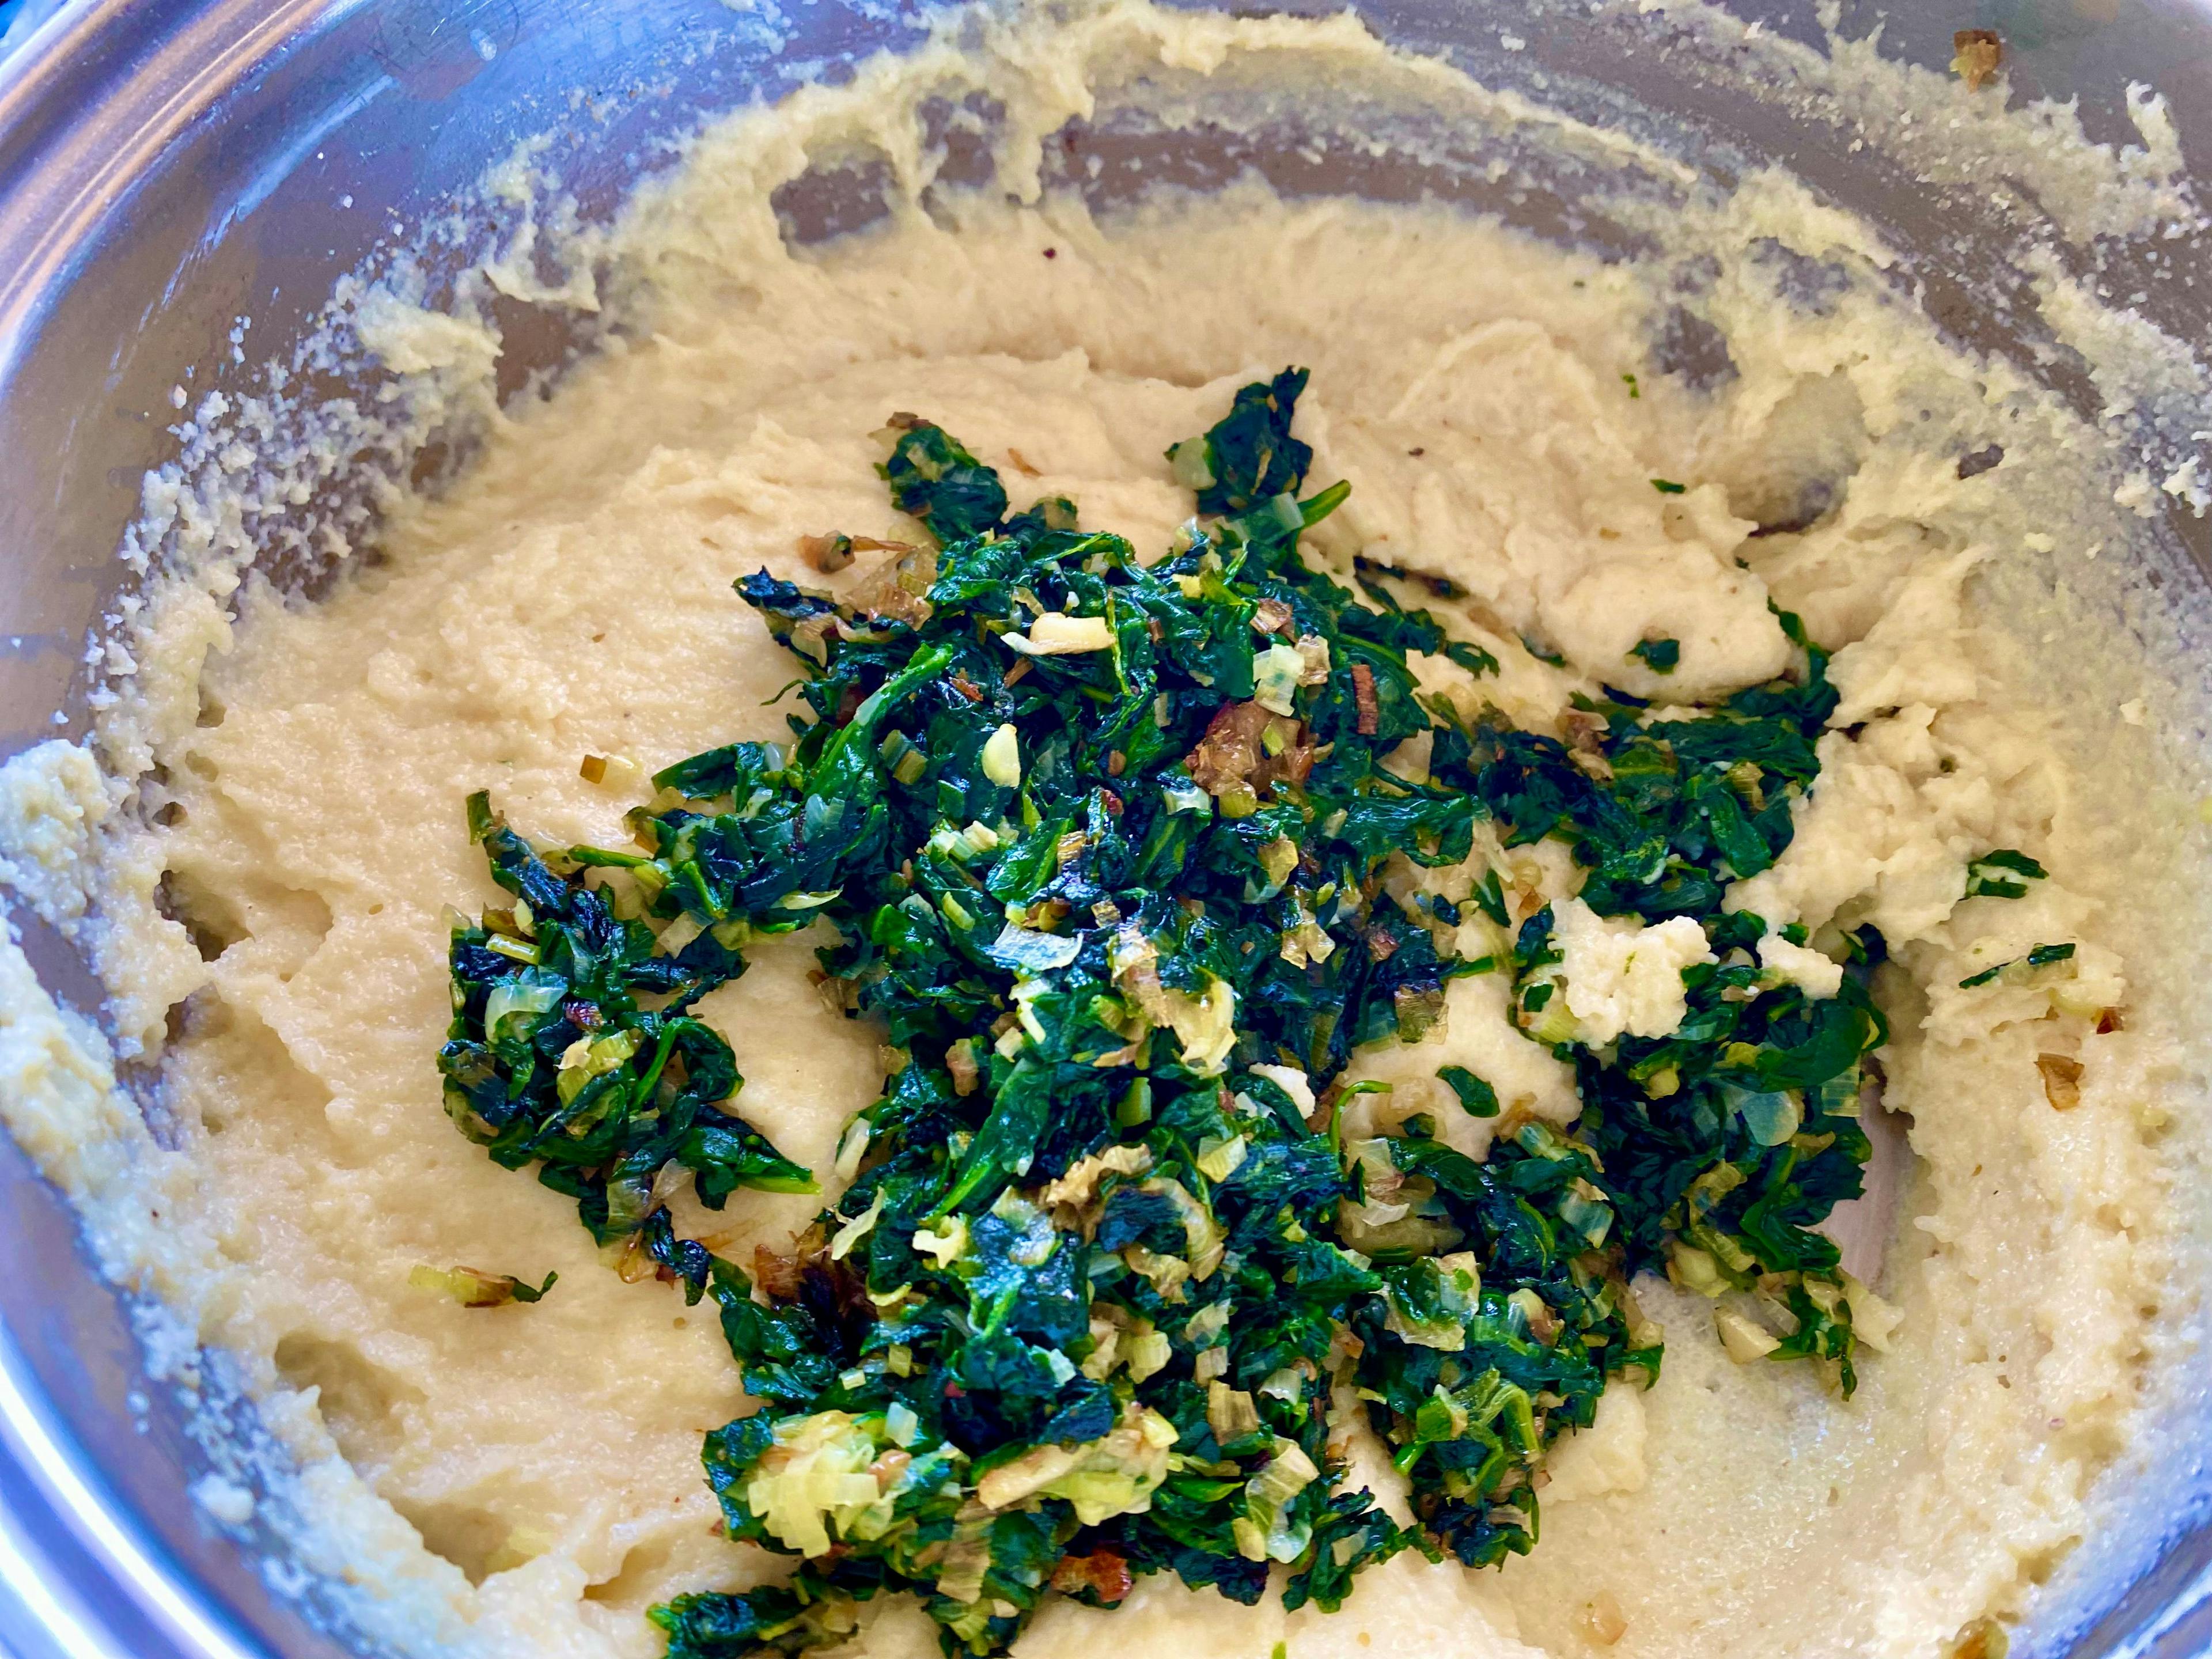 chopped spinach and leek being added to semolina purée